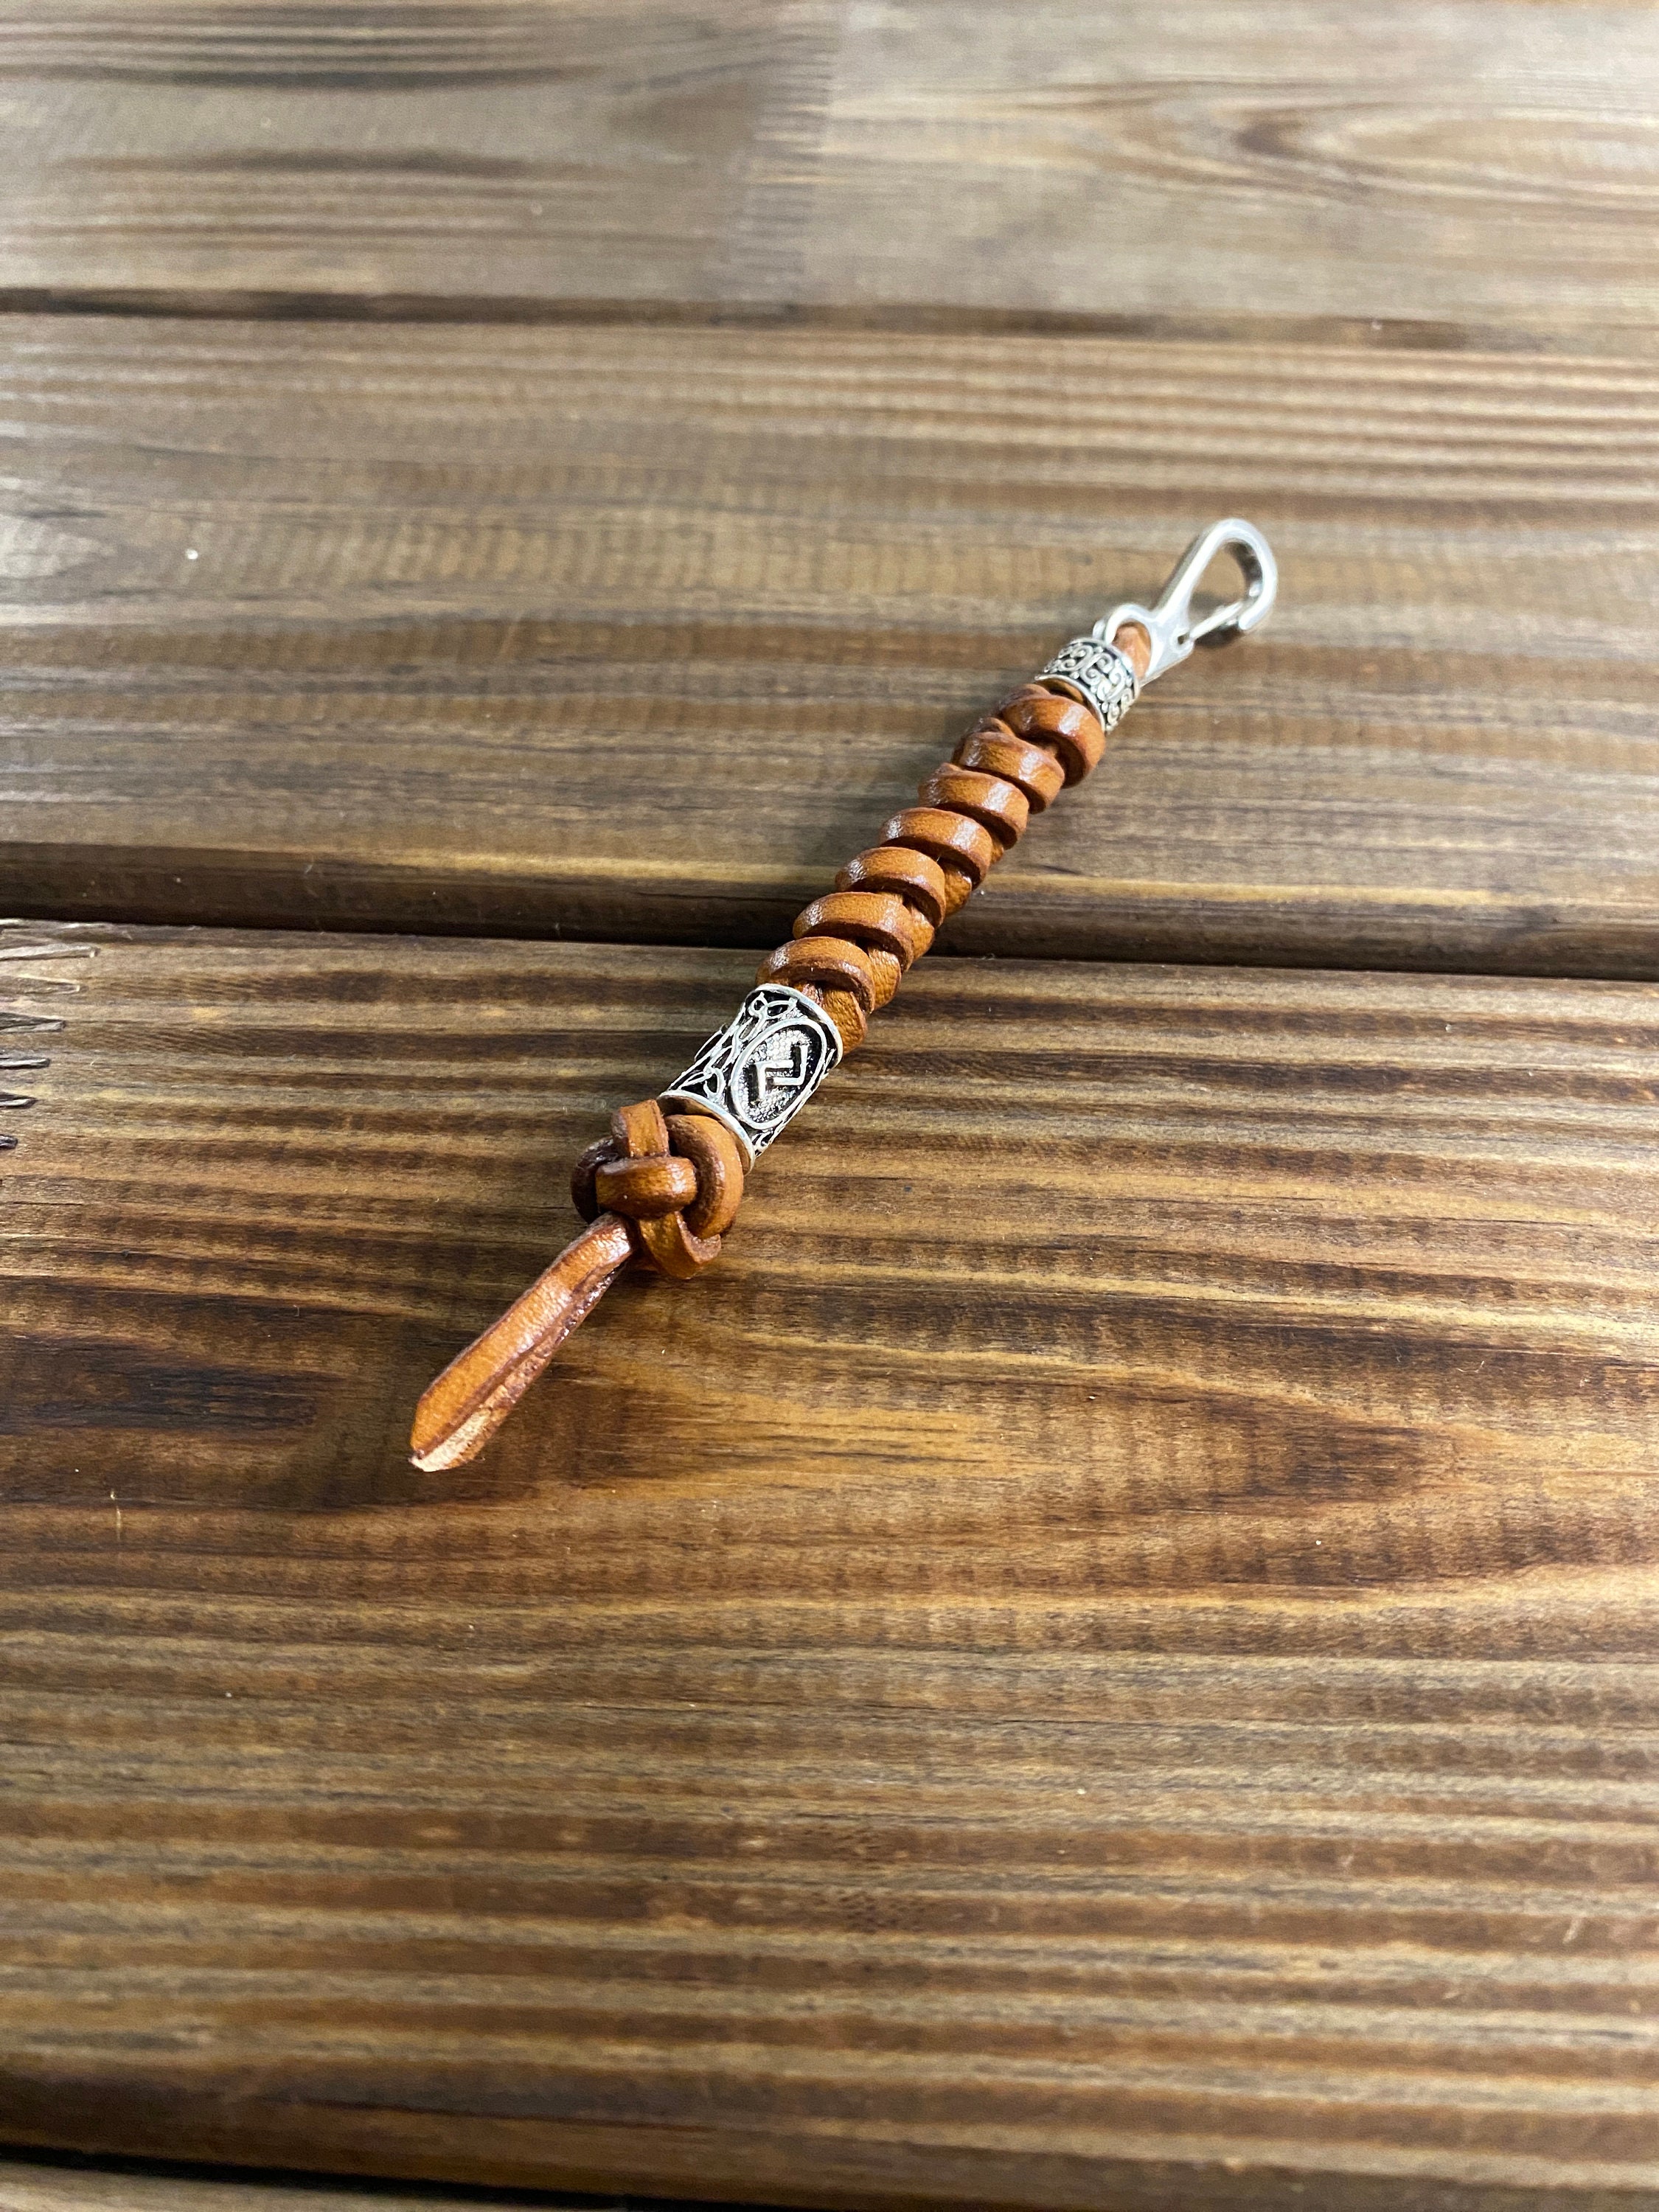 Leather Lanyard, Handmade Woven Keychain With Rune Beads and Key